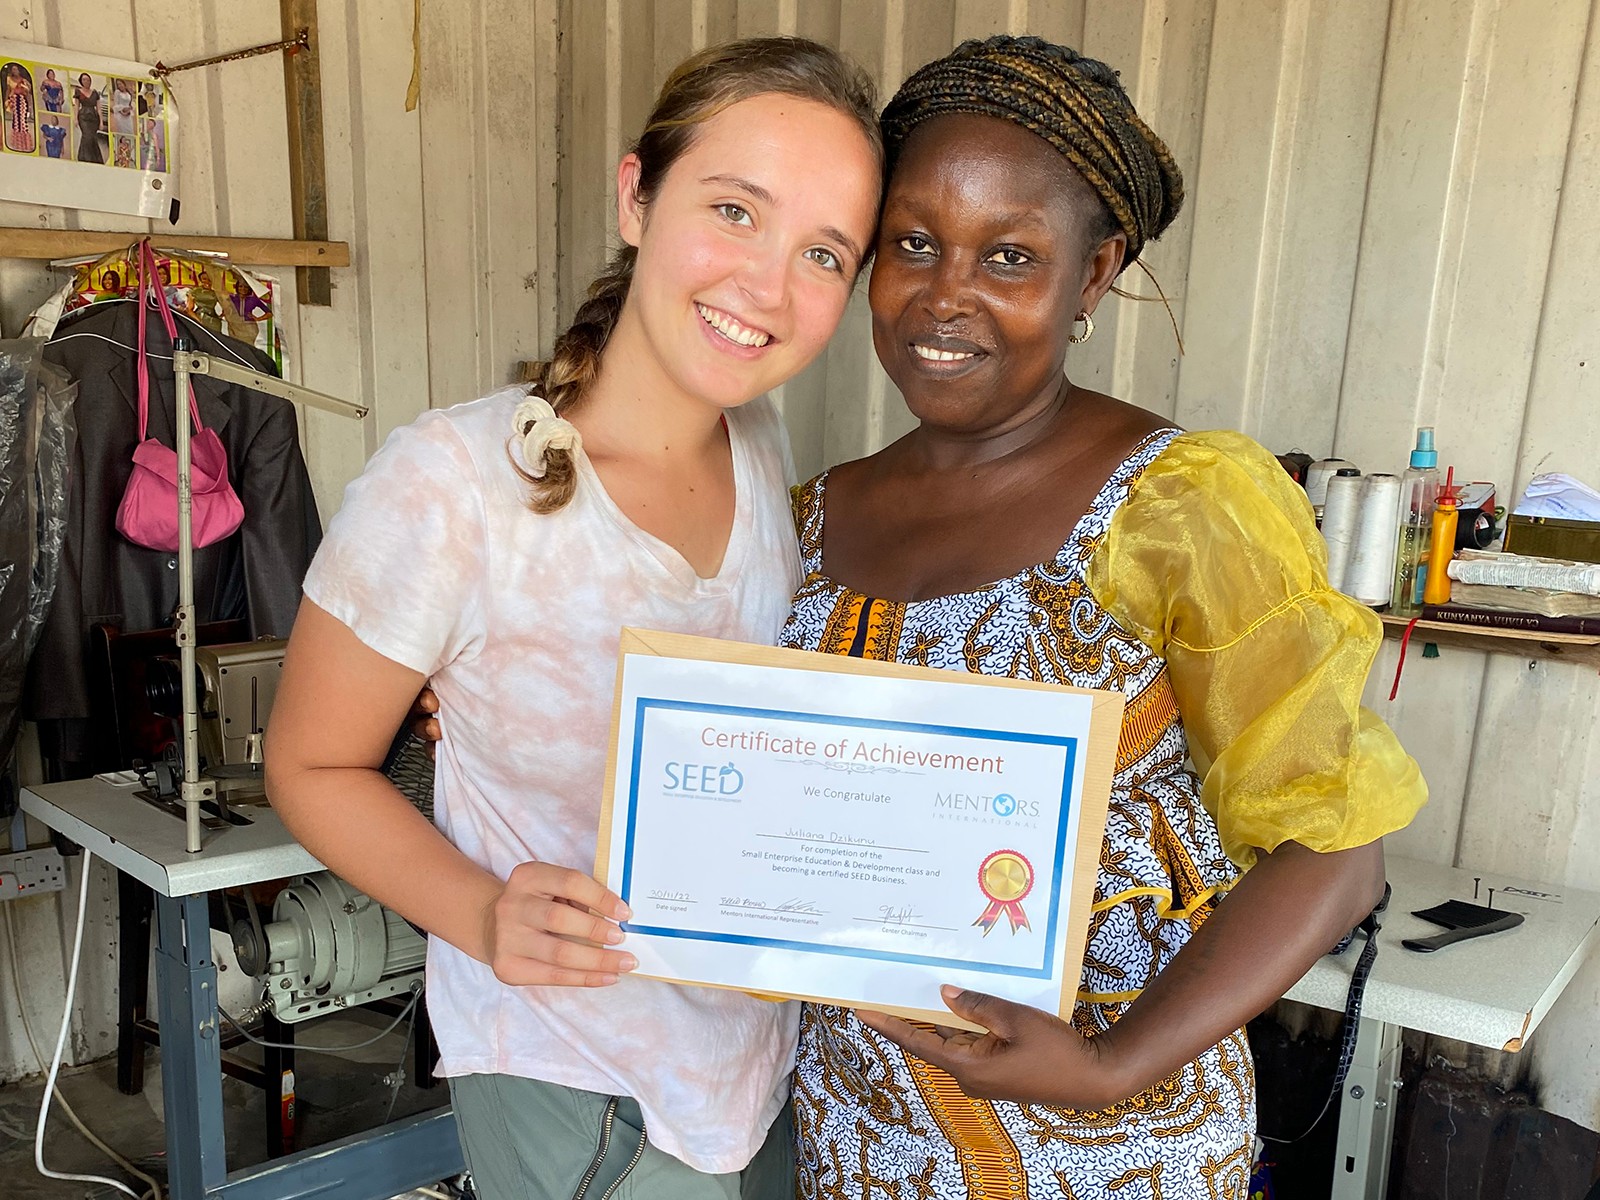 Two women pose with a certificate